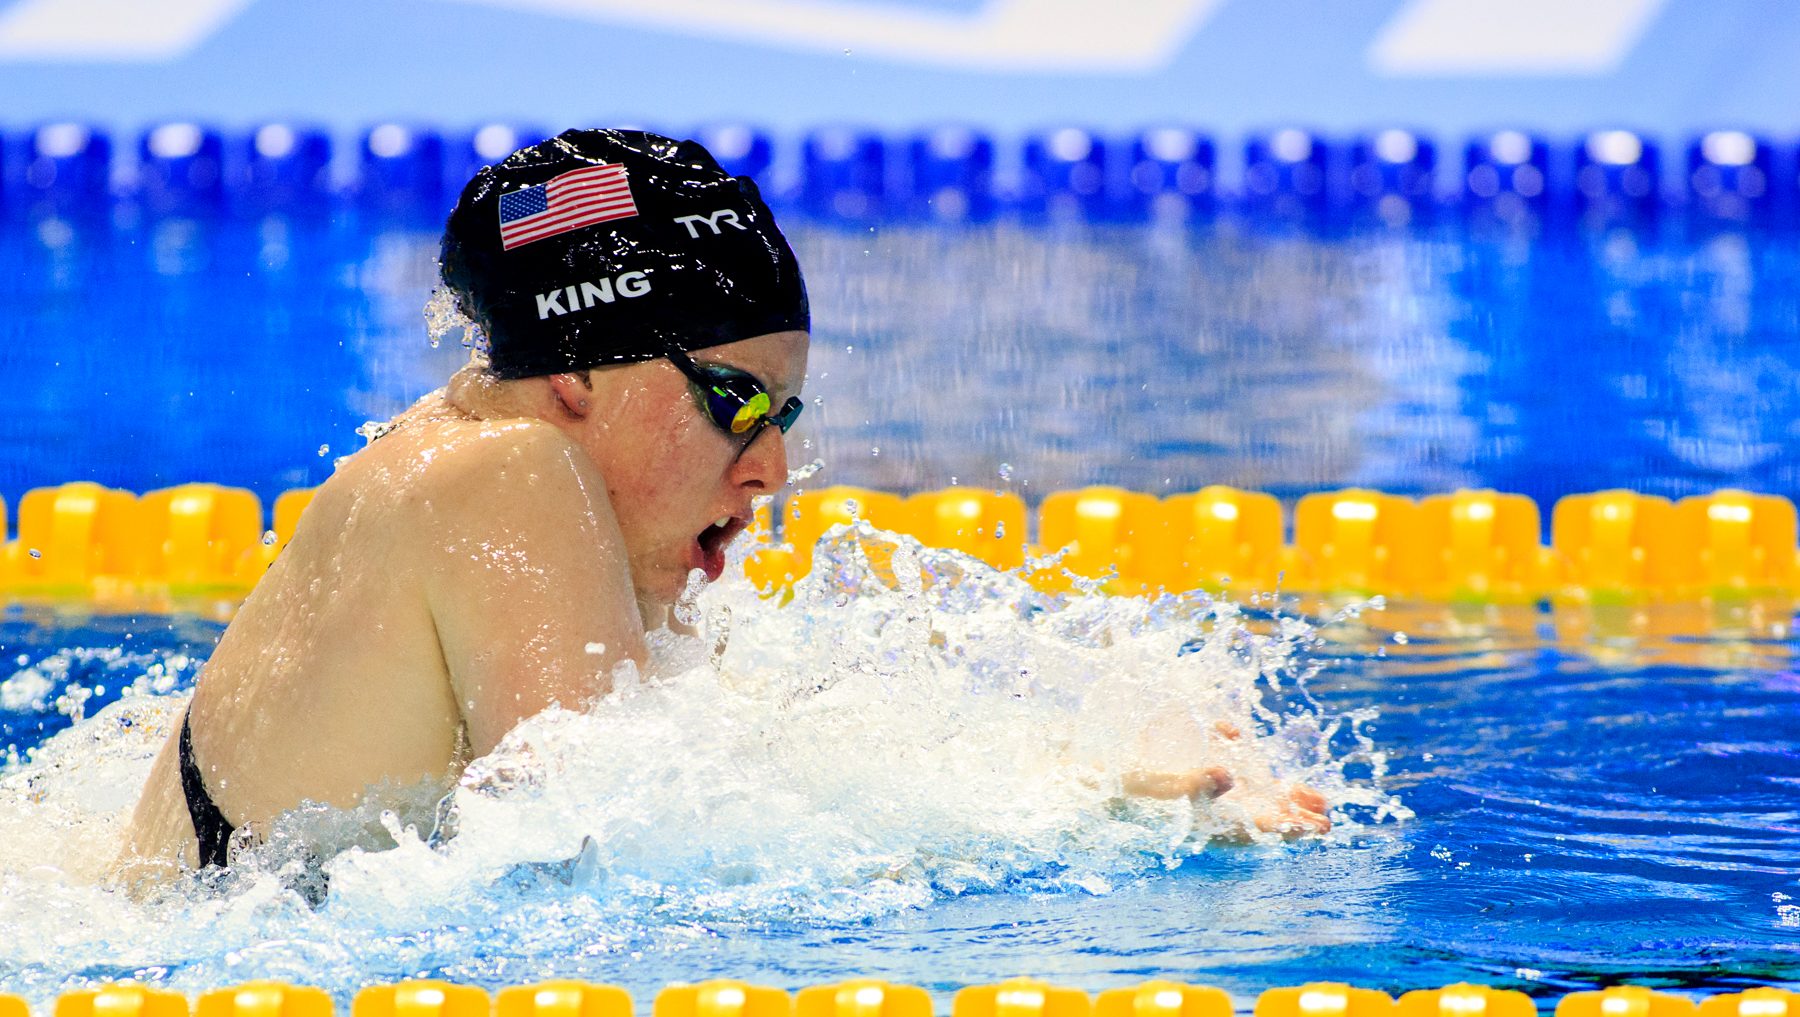 How to Watch Swimming World Championships Online in USA